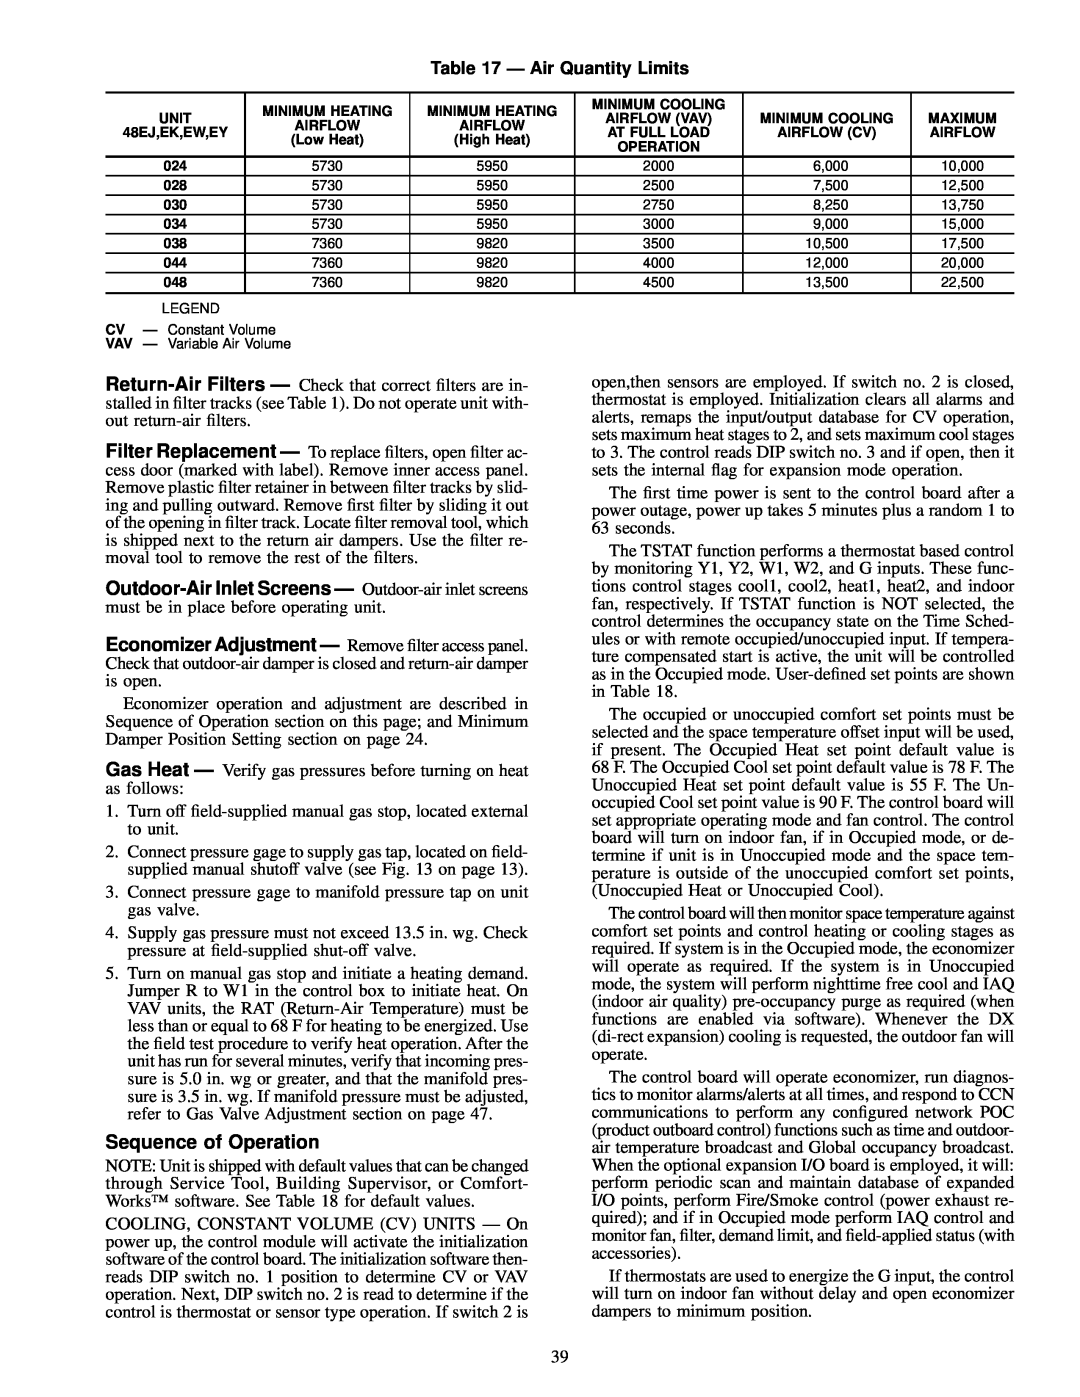 Carrier EY024-048, 48EJ, EW, EK installation instructions Sequence of Operation, Ð Air Quantity Limits 